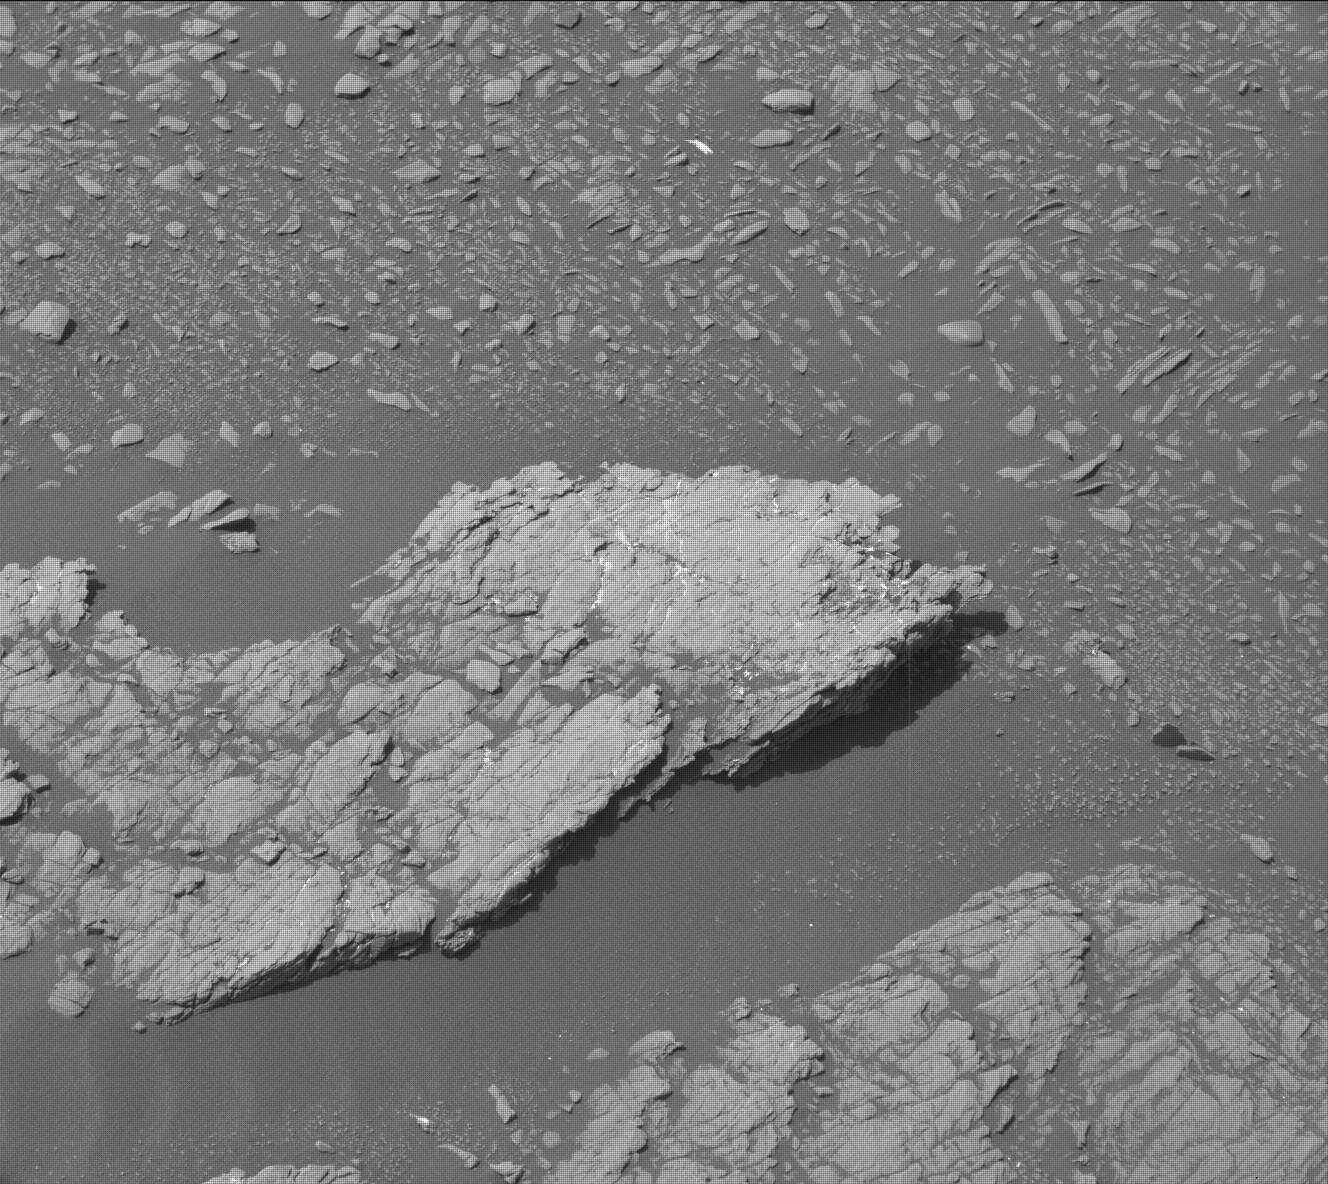 Sol 2379: Wrapping up at Aberlady